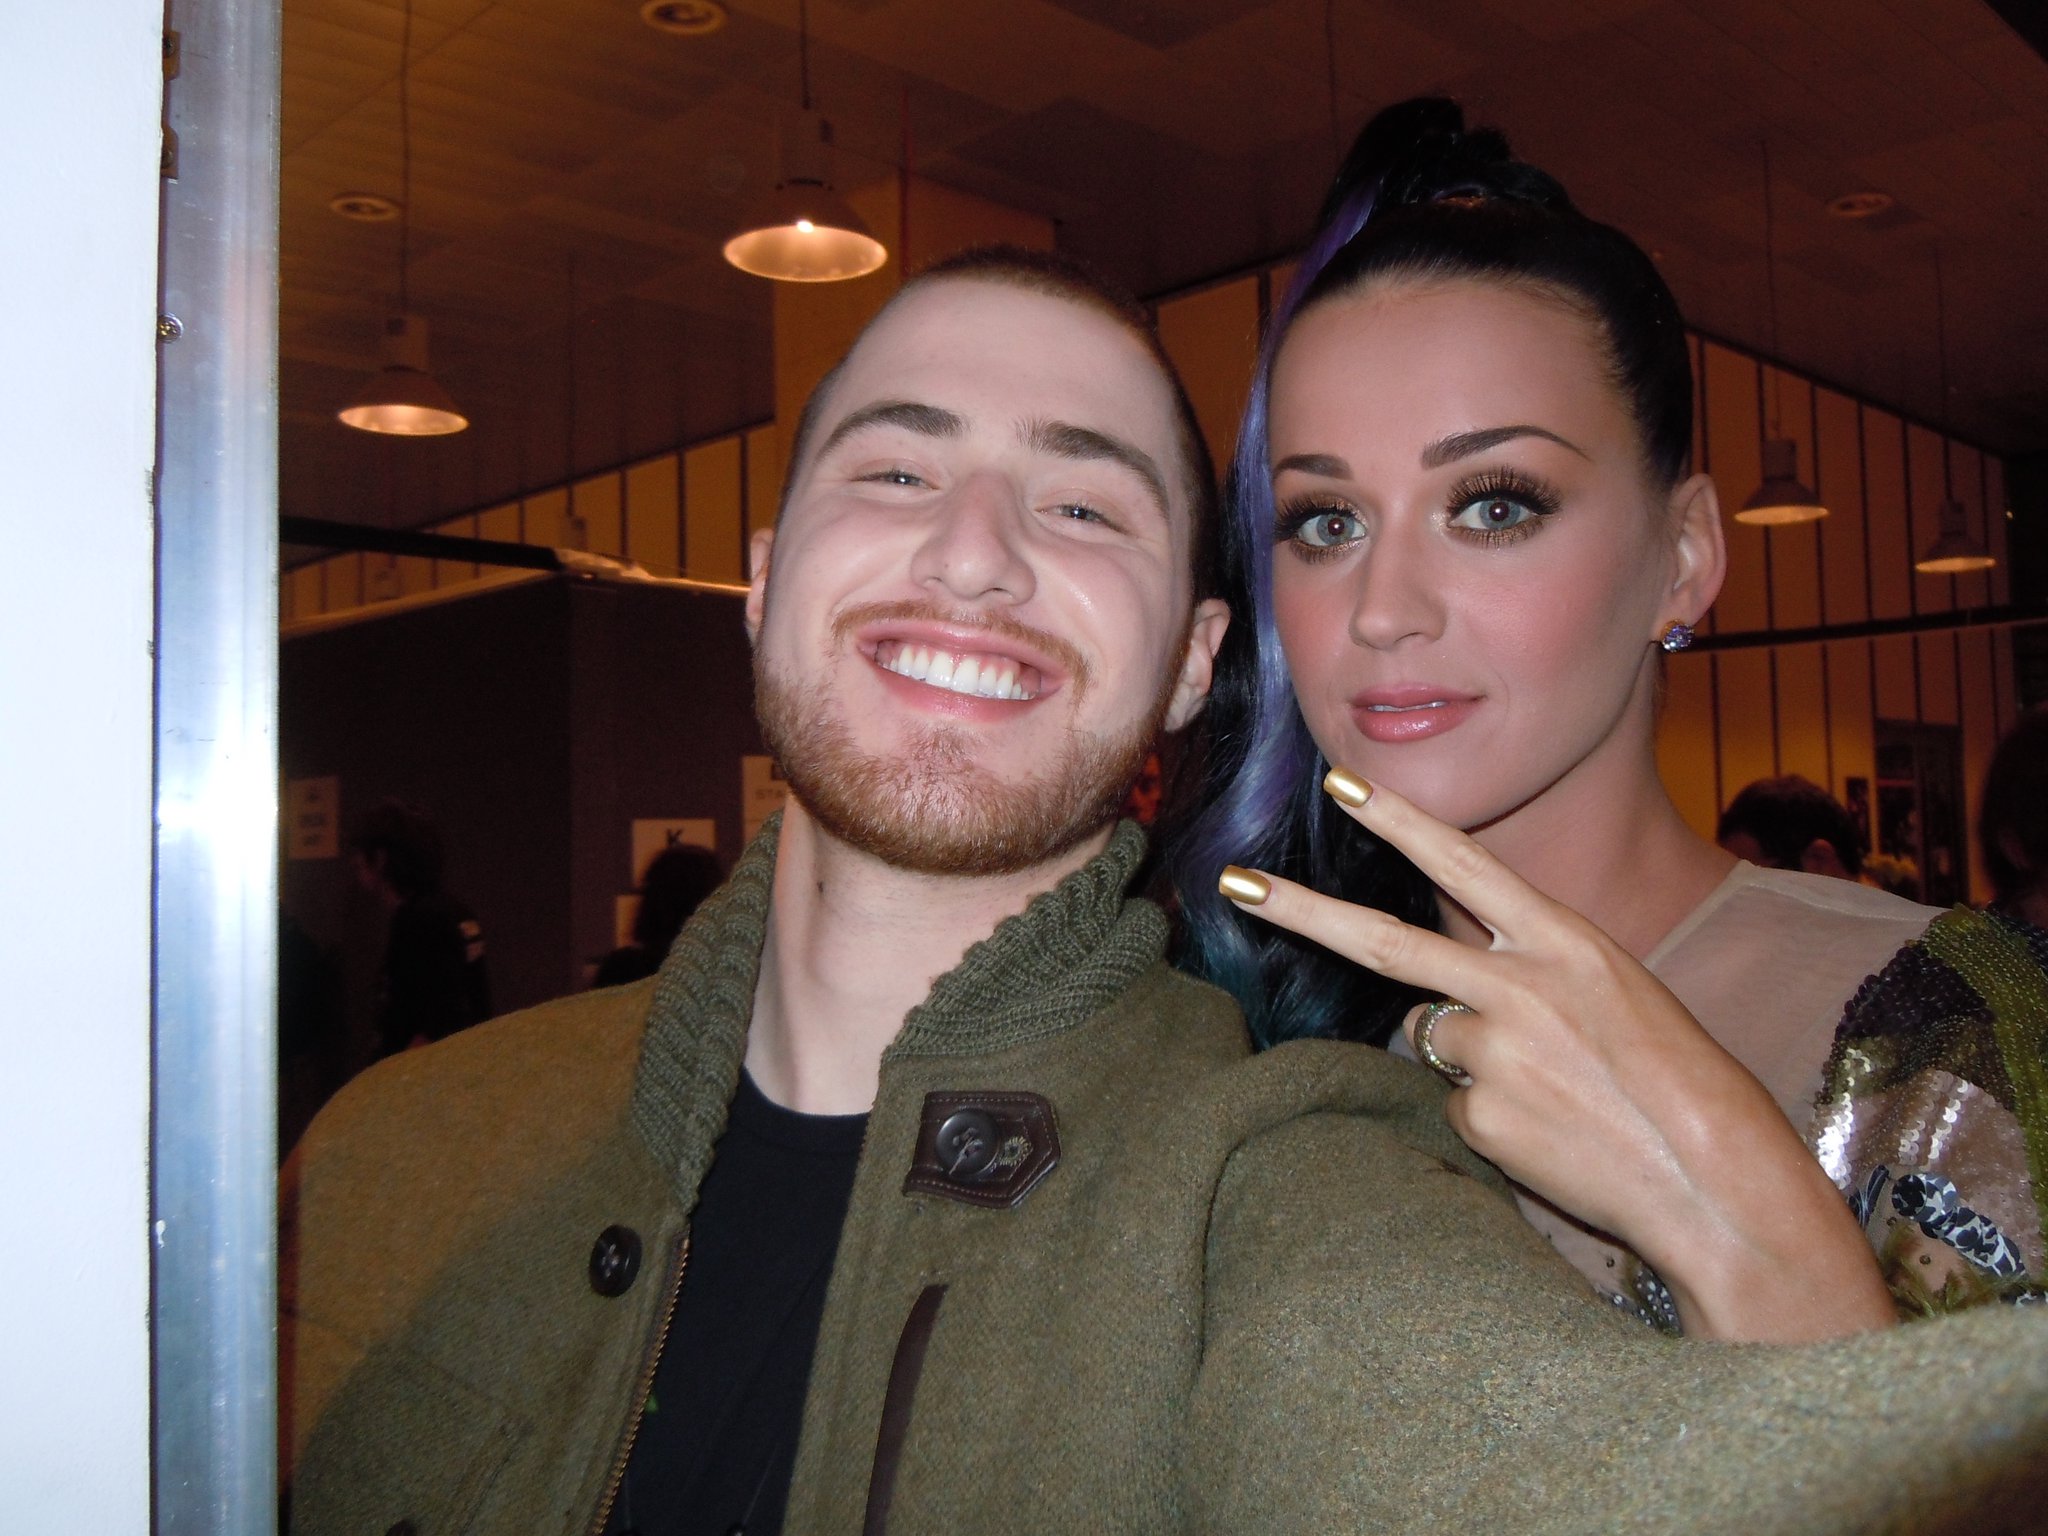 Mike Posner and Katy Perry - MTV Europe Awards 2010
